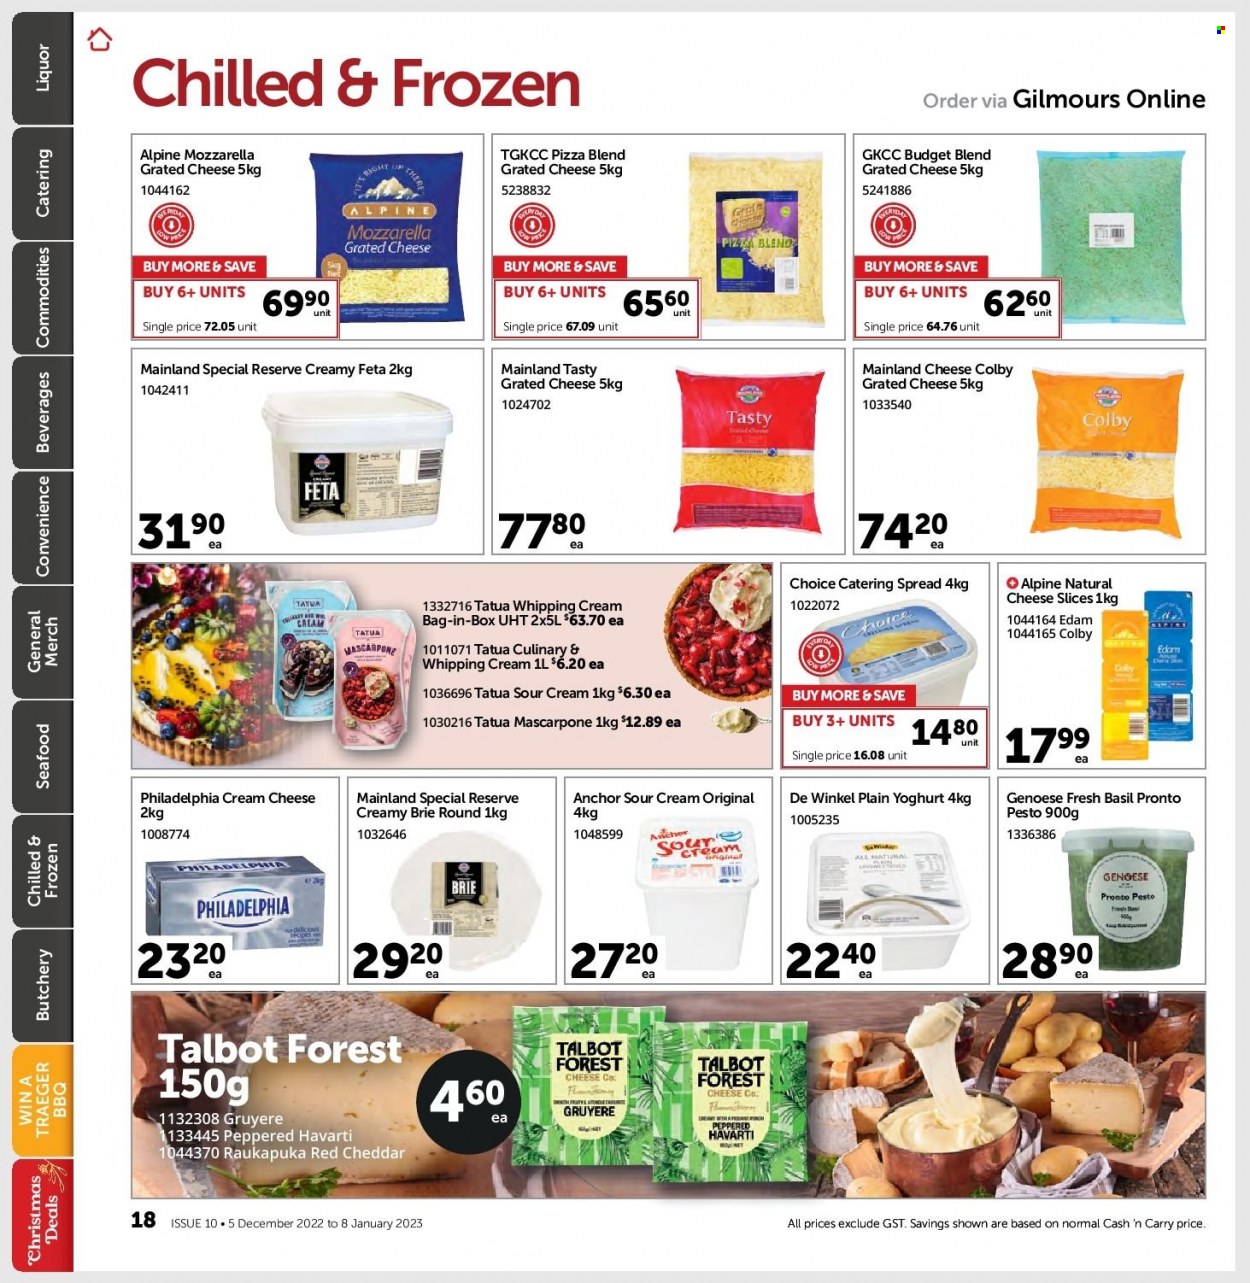 thumbnail - Gilmours mailer - 05.12.2022 - 08.01.2023 - Sales products - seafood, pizza, Colby cheese, cream cheese, edam cheese, Gruyere, mascarpone, sliced cheese, Havarti, Philadelphia, cheddar, brie, grated cheese, Talbot Forest Cheese, feta, yoghurt, Anchor, sour cream, whipping cream, pesto, liquor. Page 17.